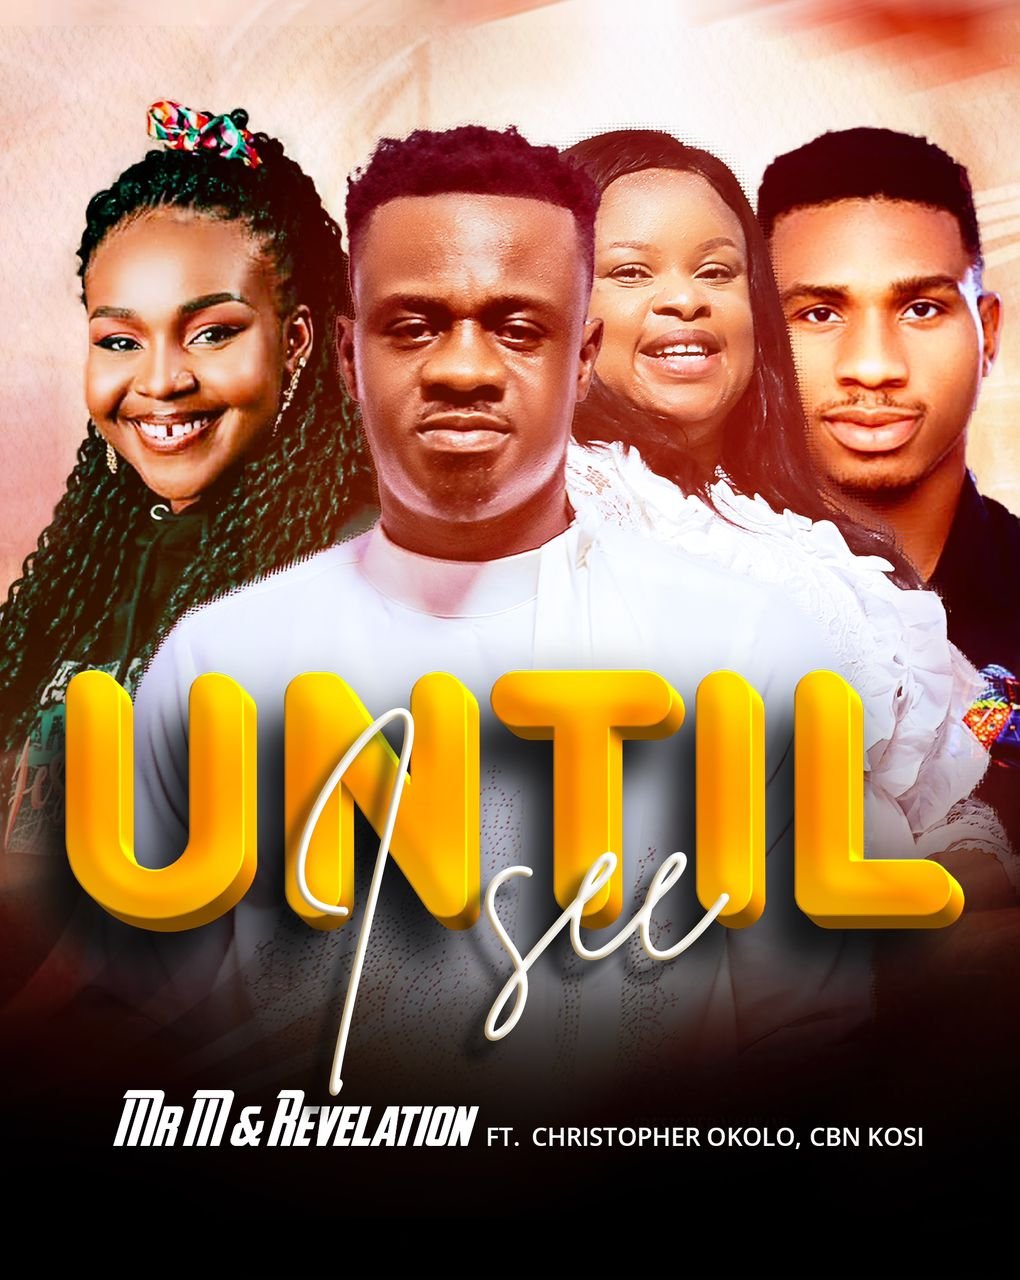 UNTIL I SEE Ft Christopher Okolo x CBN KOSi) Mp3 Download